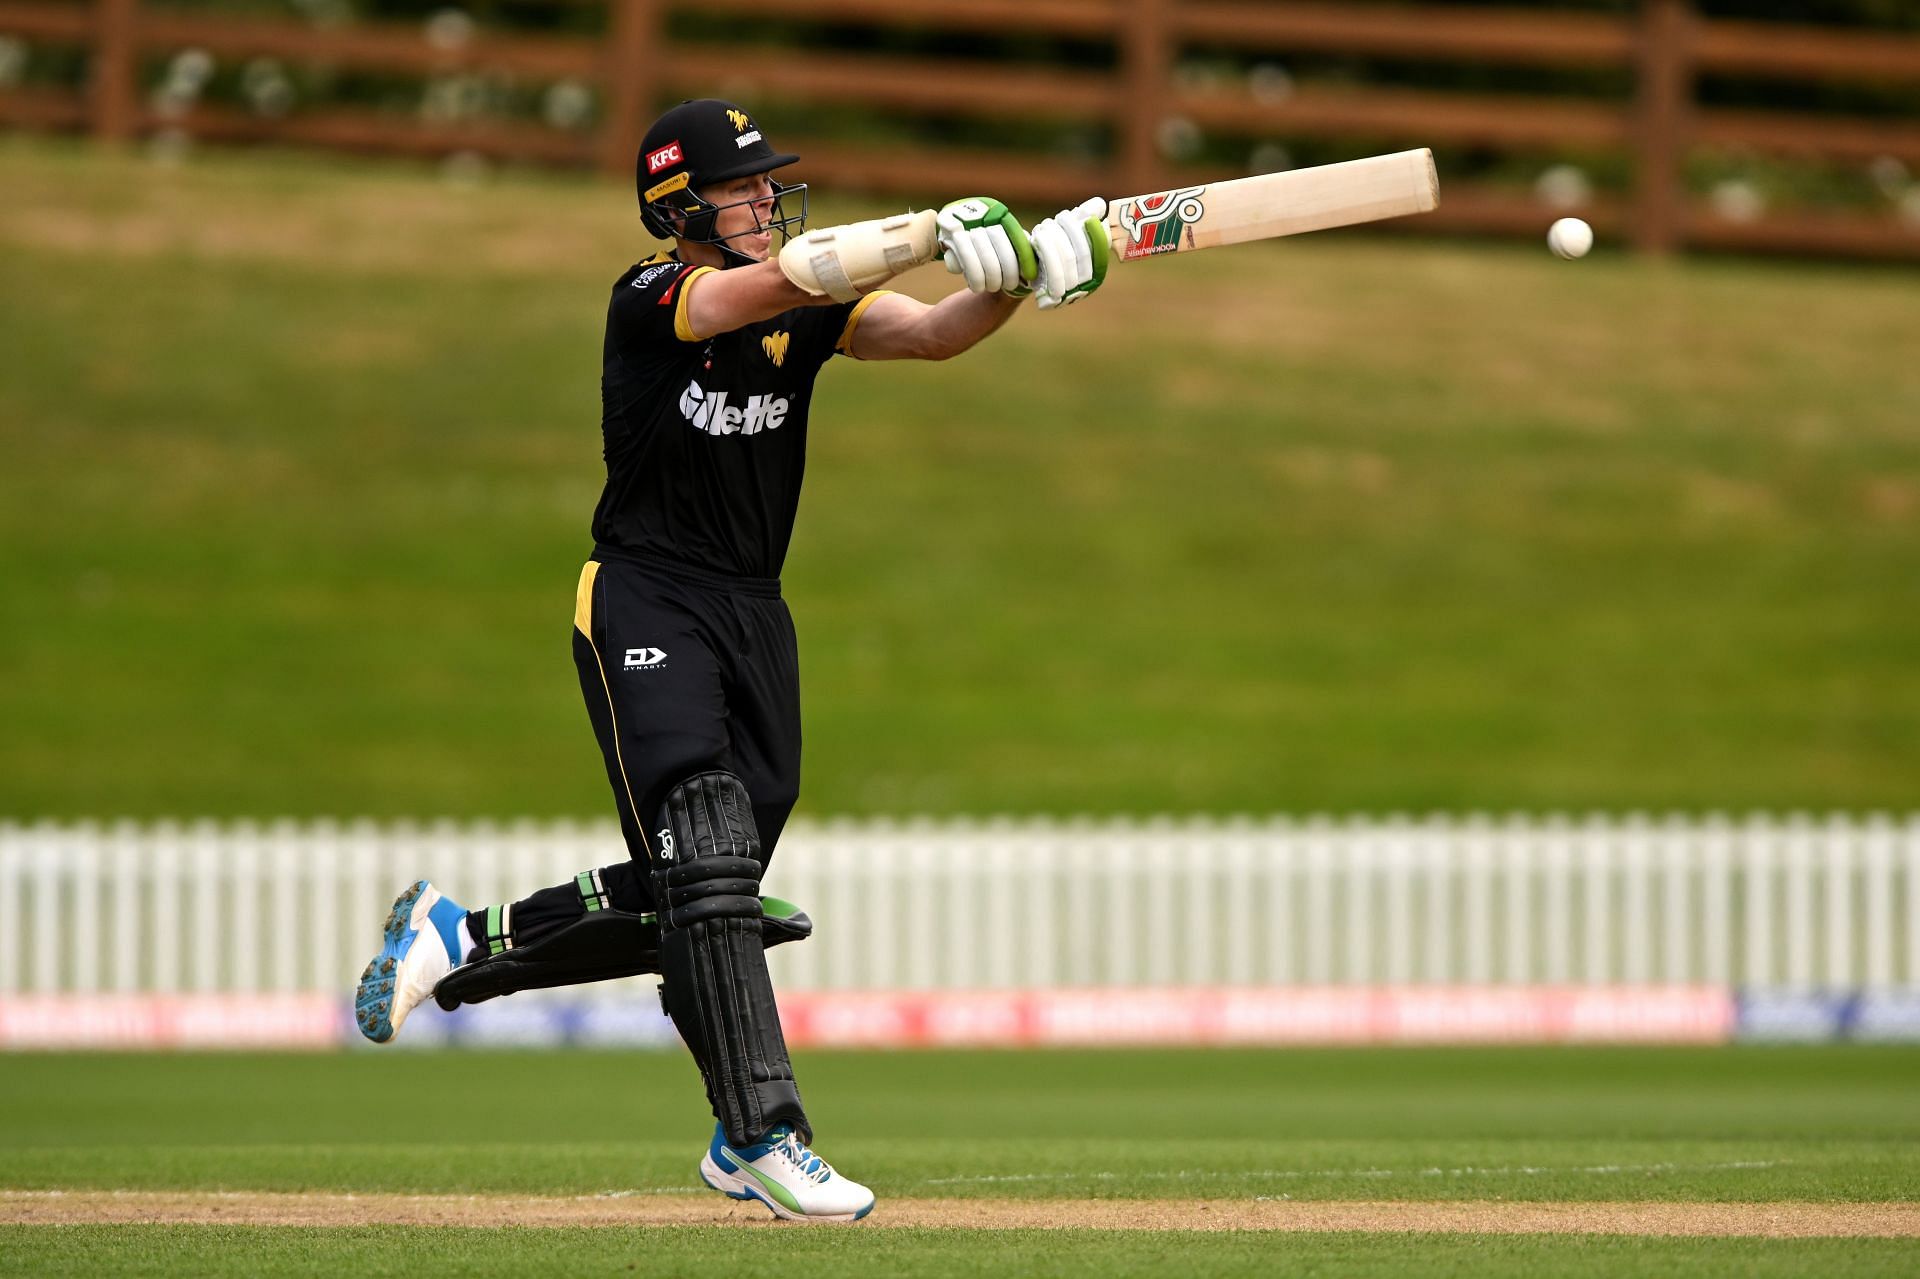 Michael Bracewell was the hero for New Zealand in the first ODI against Ireland (Image Courtesy: Getty)